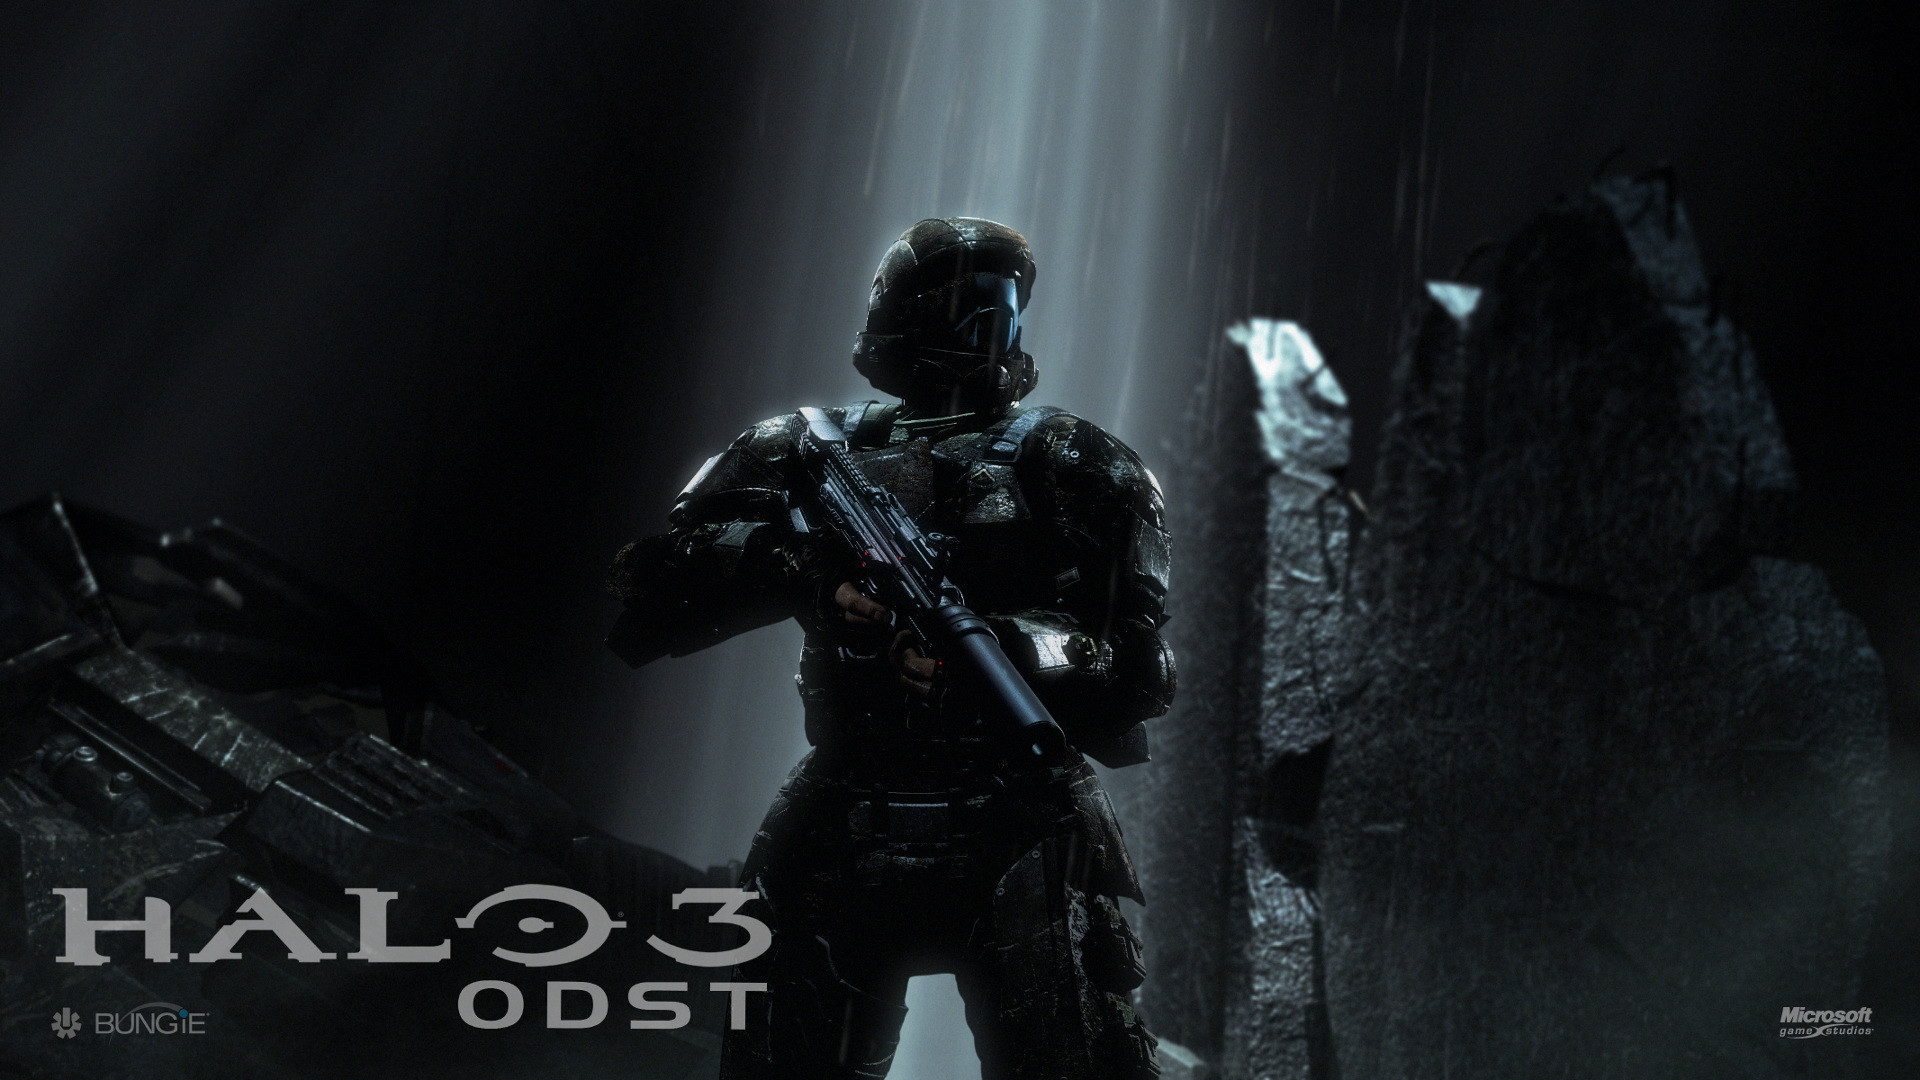 1920x1080 High Resolution Halo 3 Odst Wallpaper HD 4 Game Full Size .